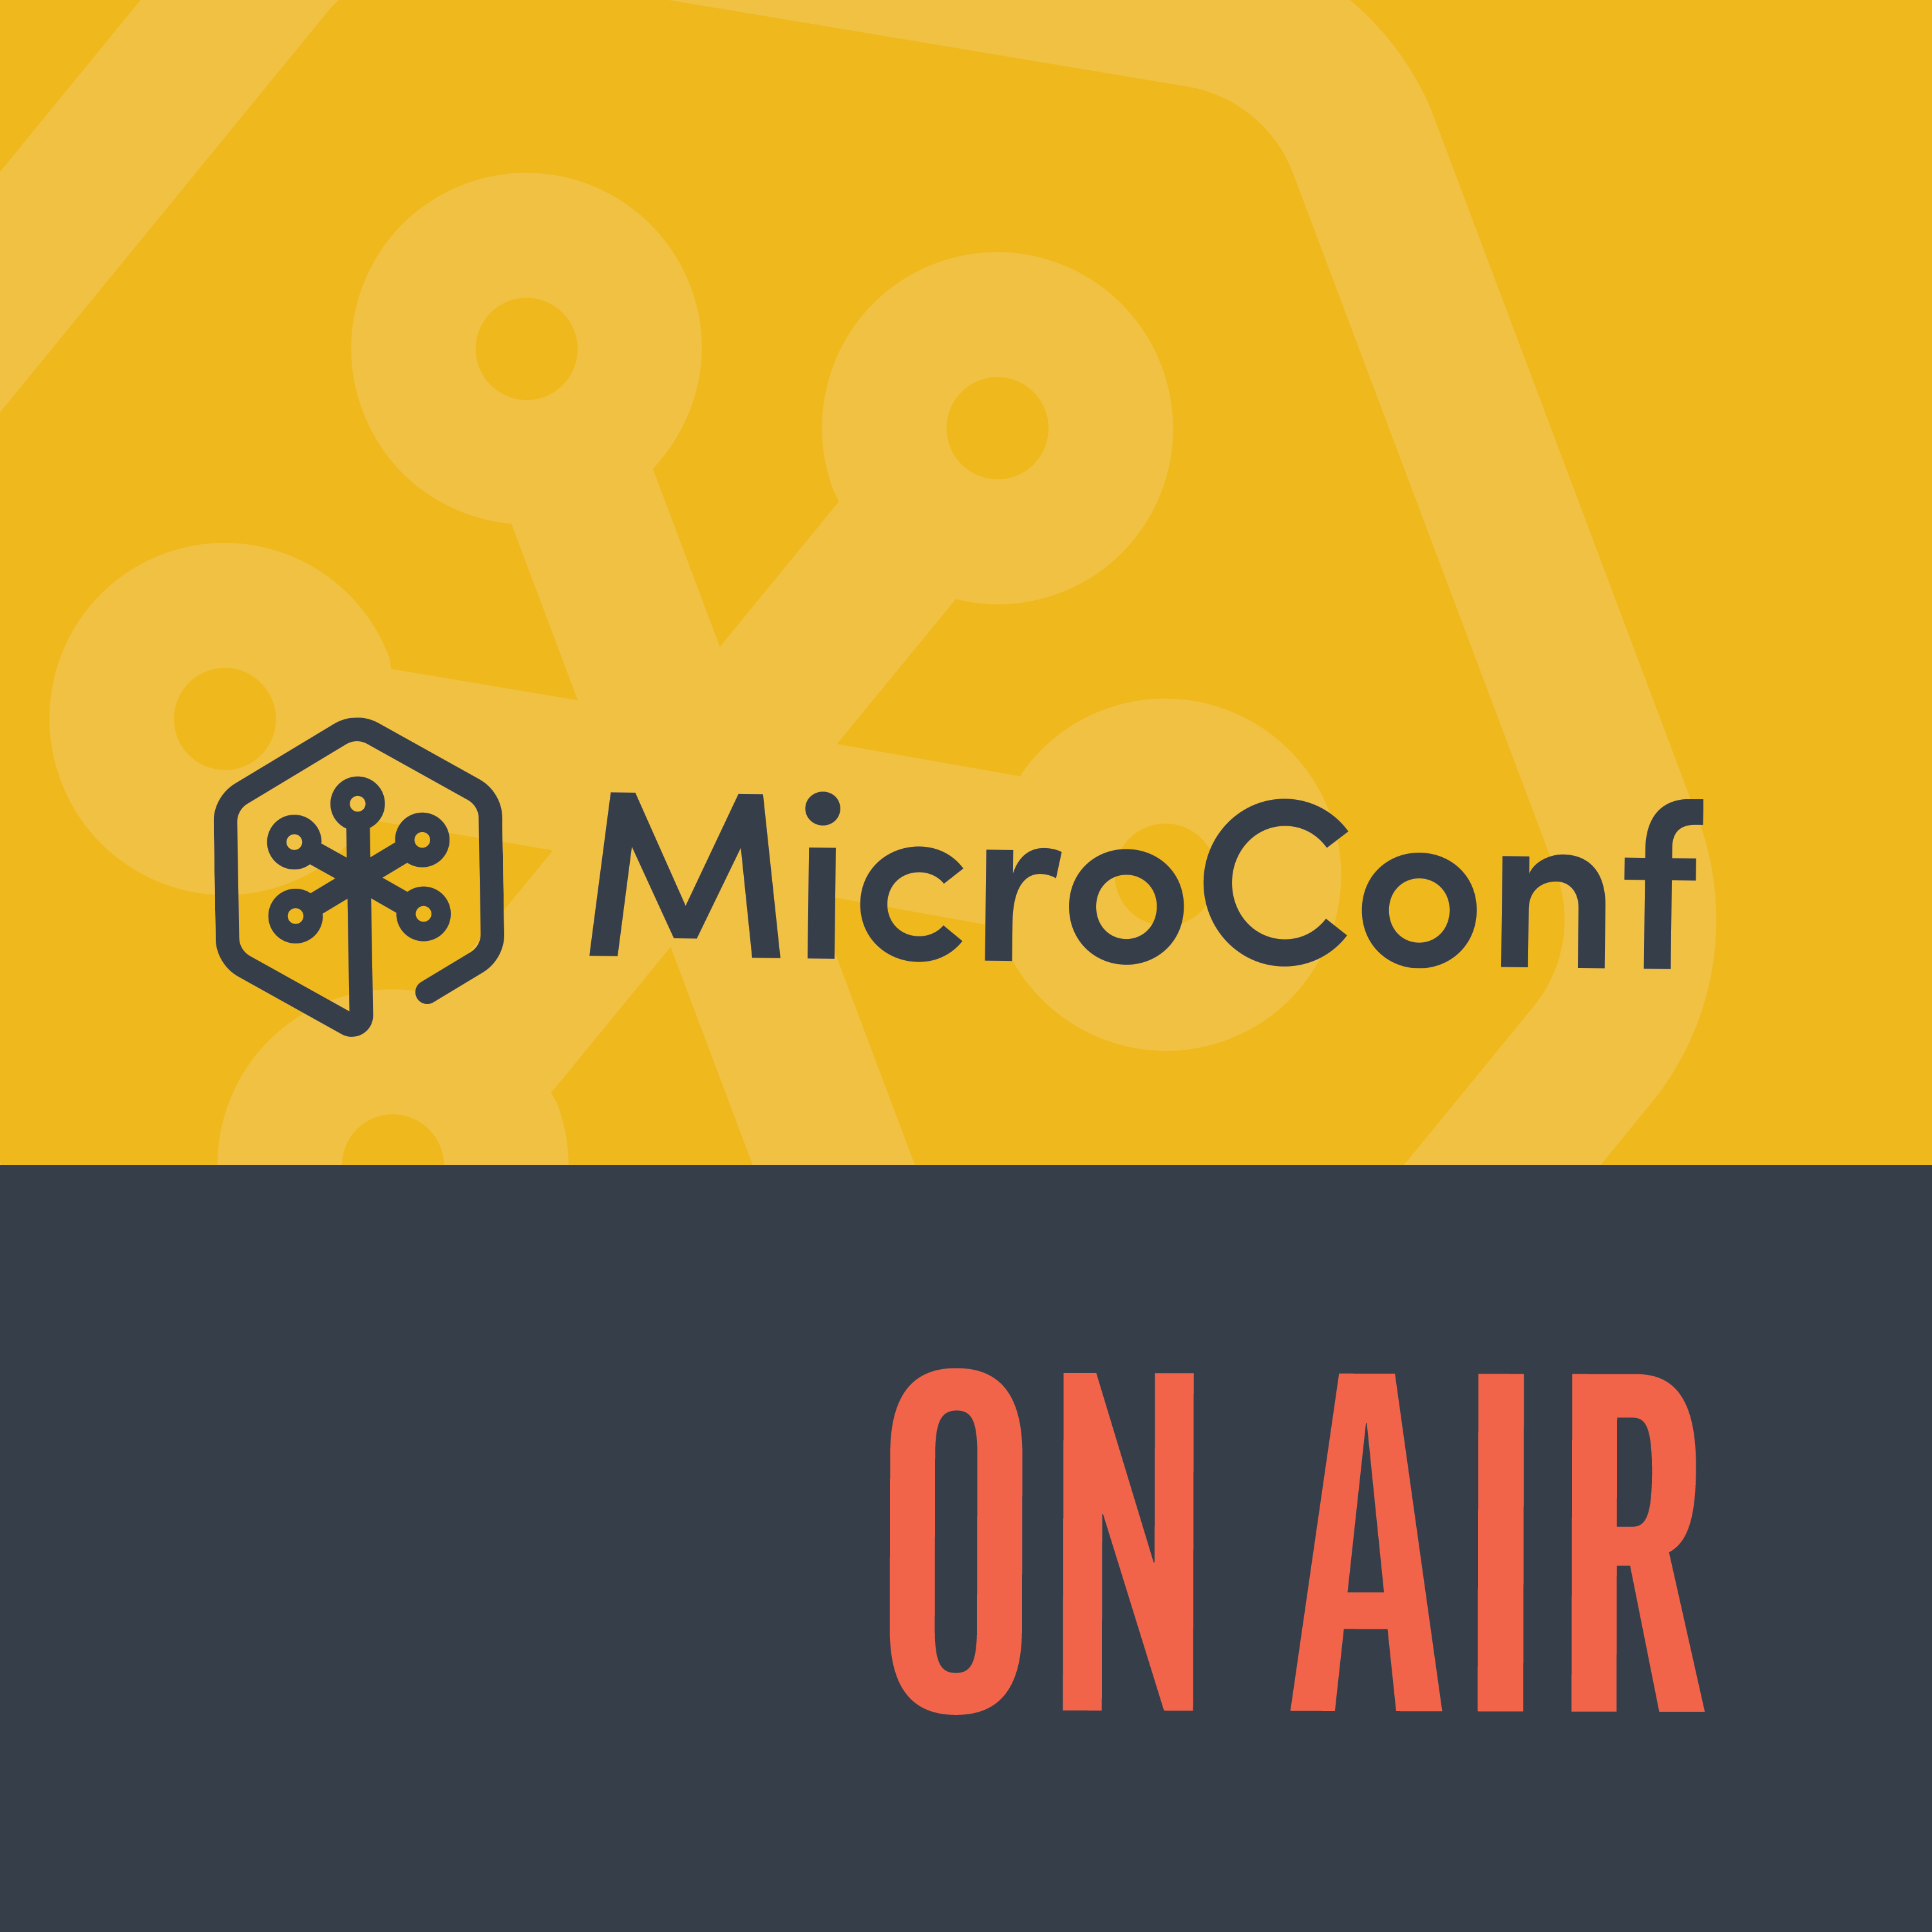 MicroConf Refresh Episode 56: From Failure to Five Figure MRR - The 6 Mistakes We Learned From Our First Failed Startup - Pierre de Wulf